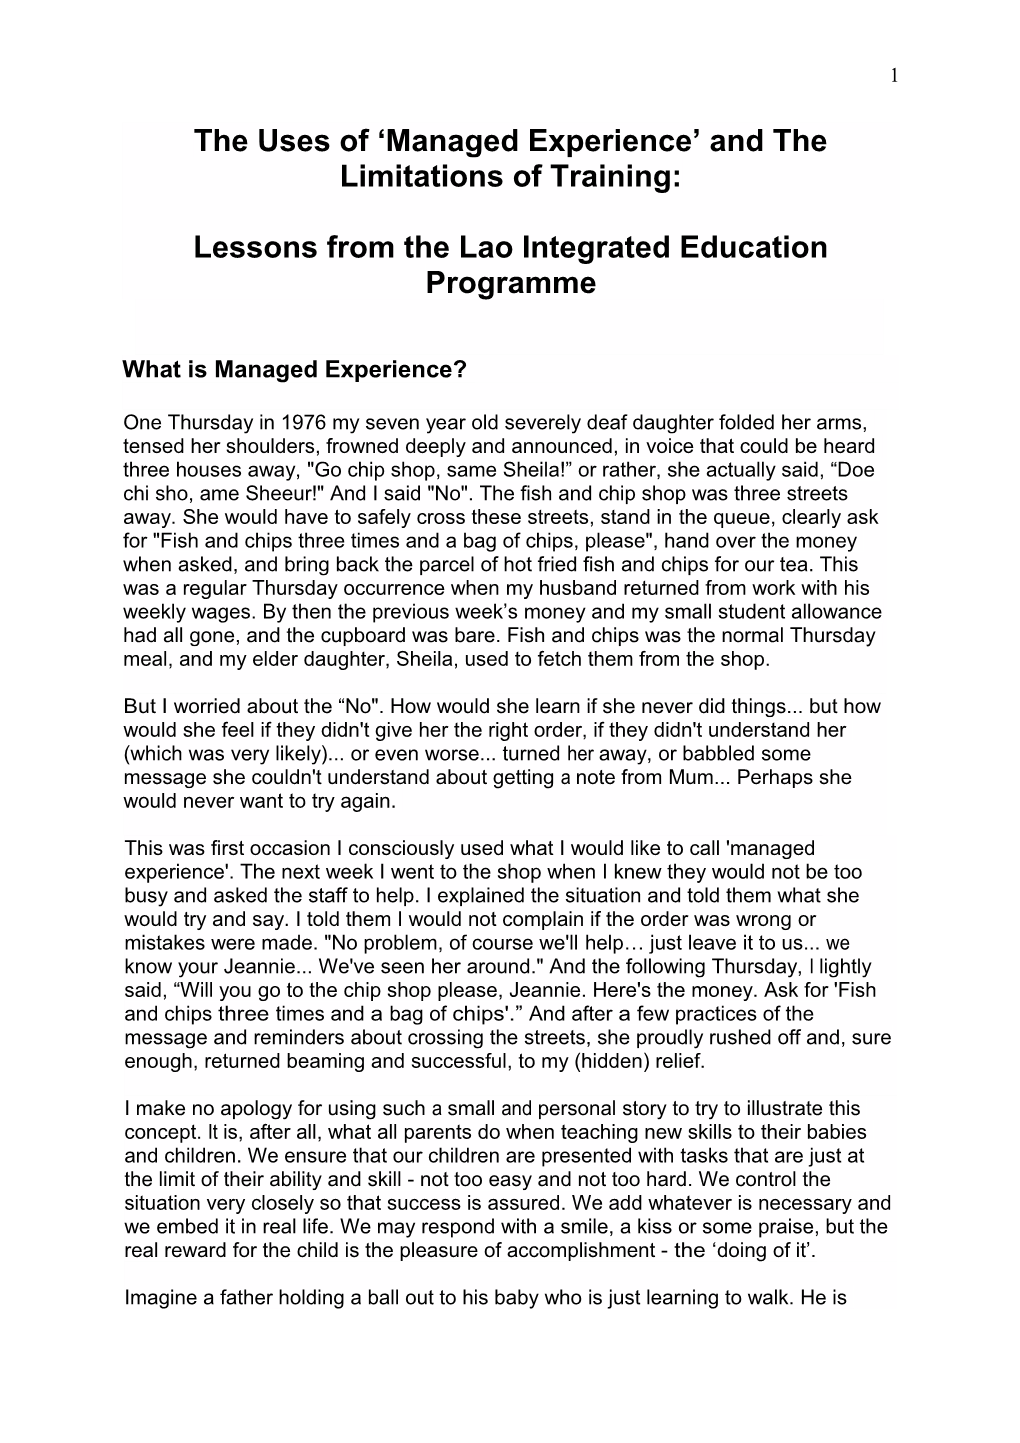 The L 'Ses of : Lanaged Experience' and the Limitations of Training